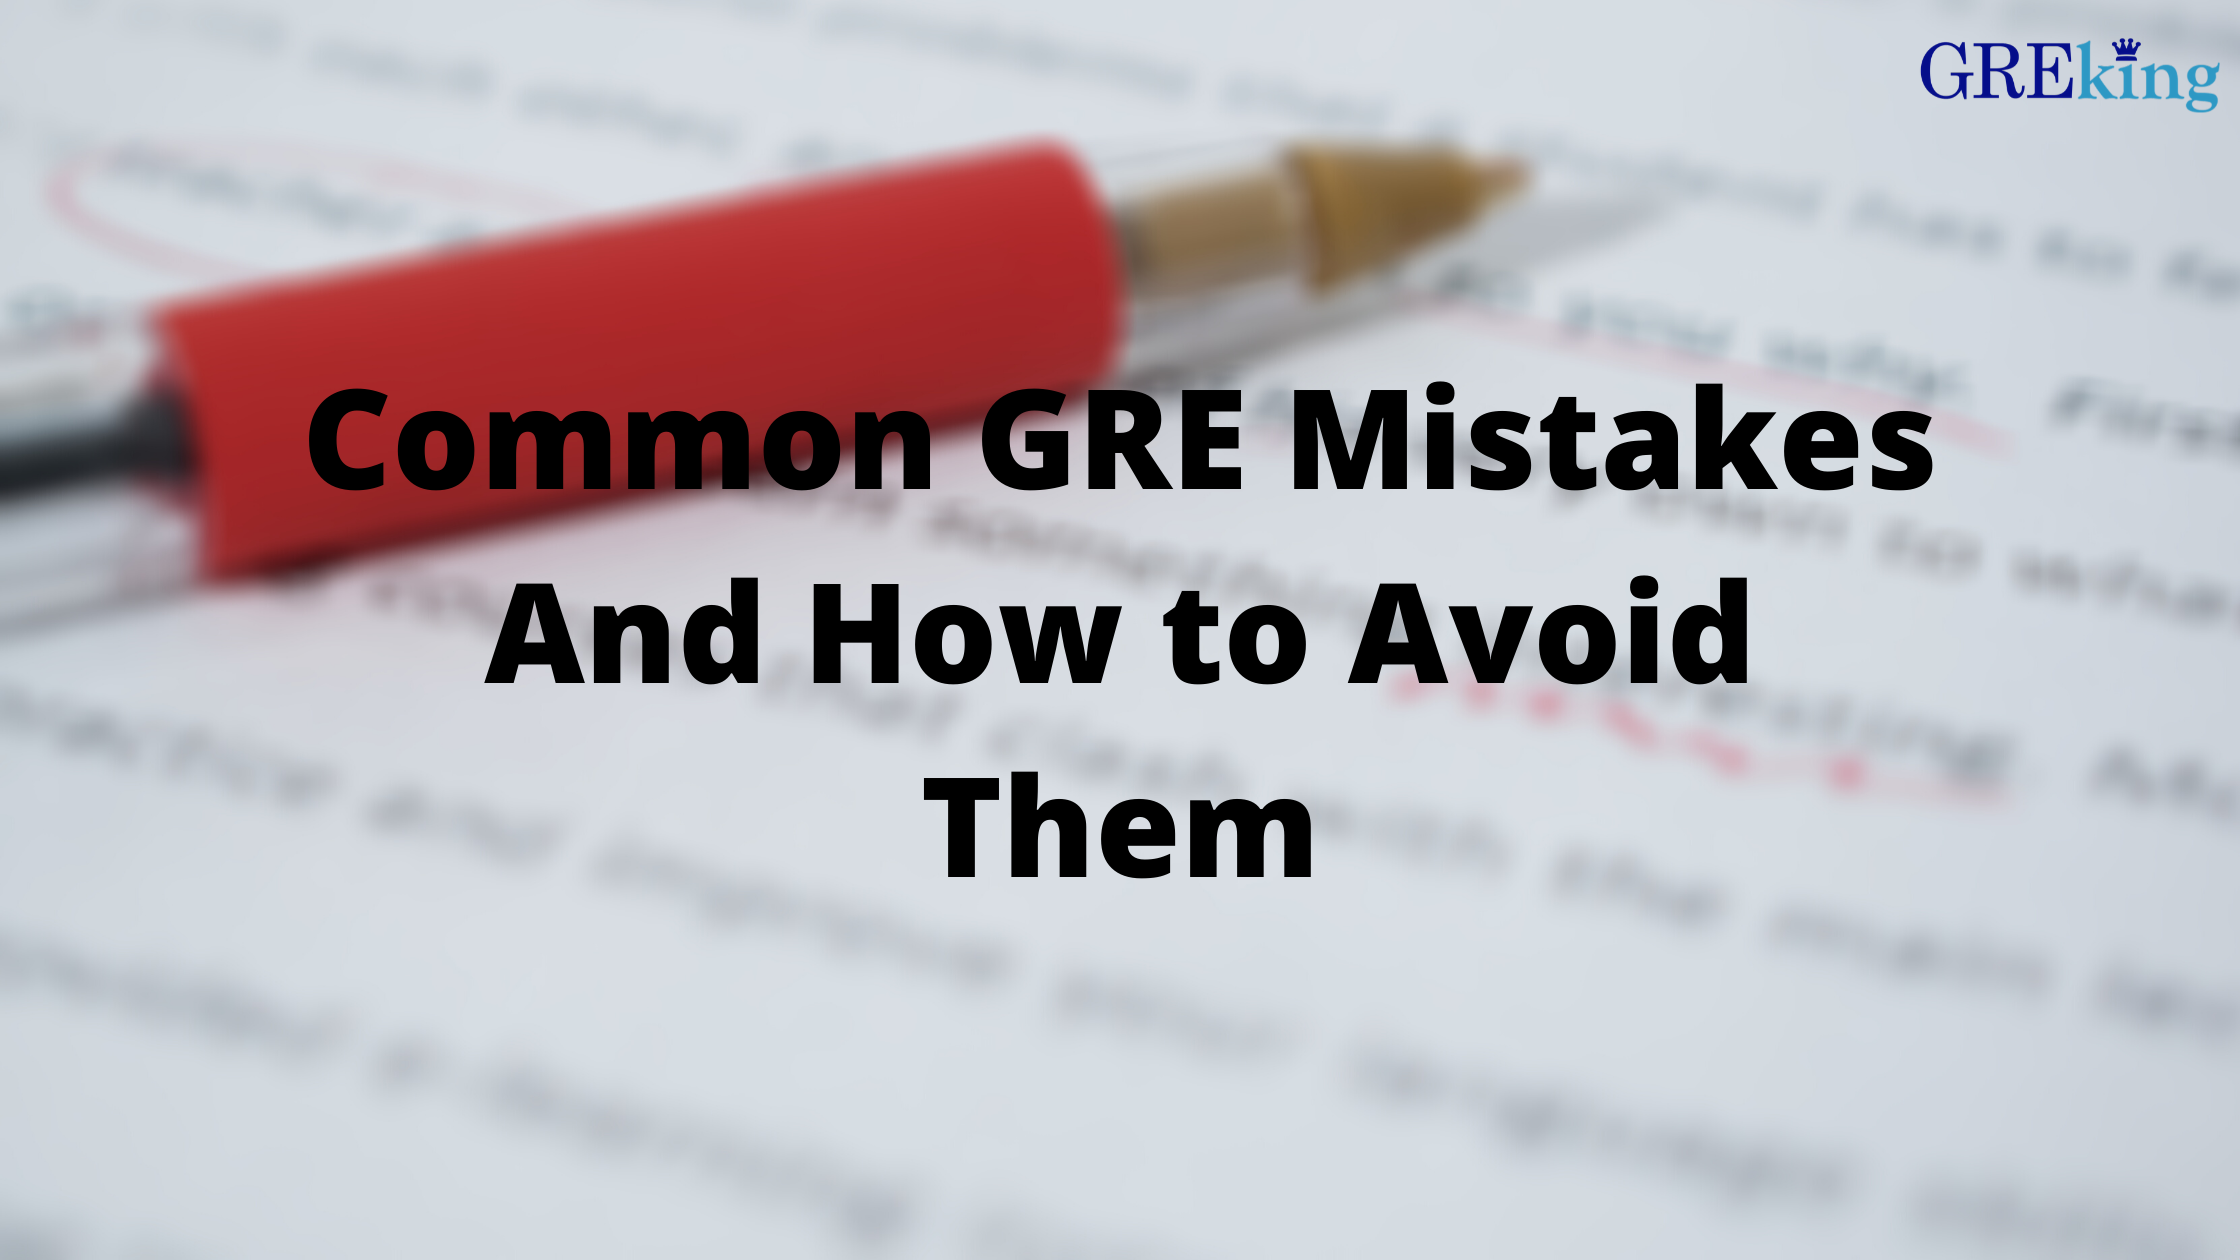 Common GRE mistakes